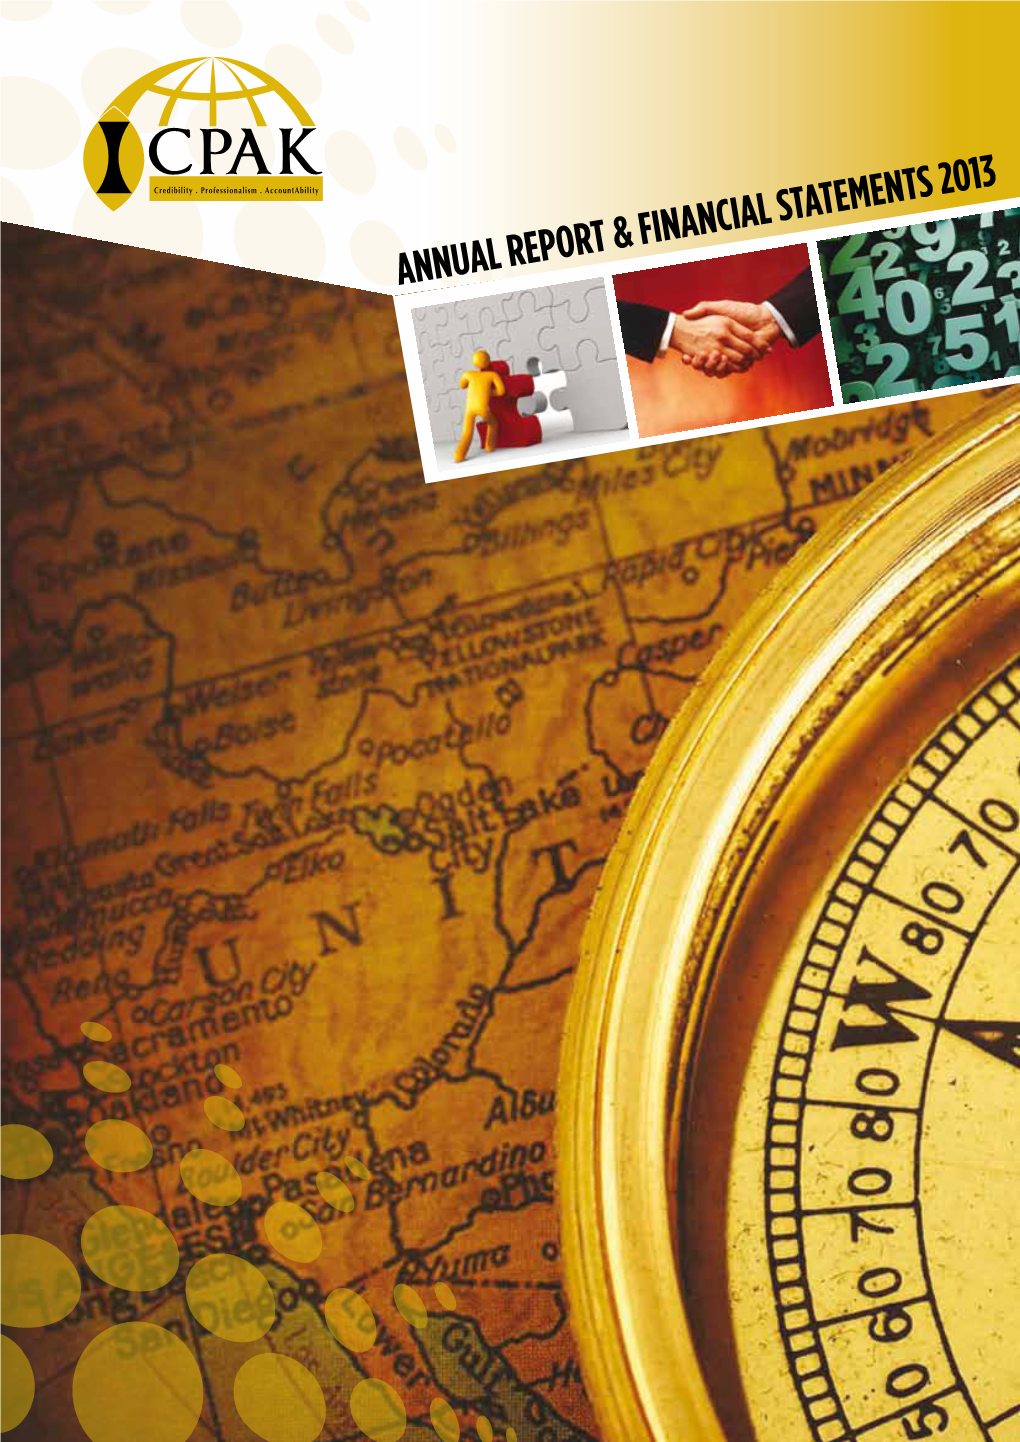 Annual Report & Financial Statements 2013